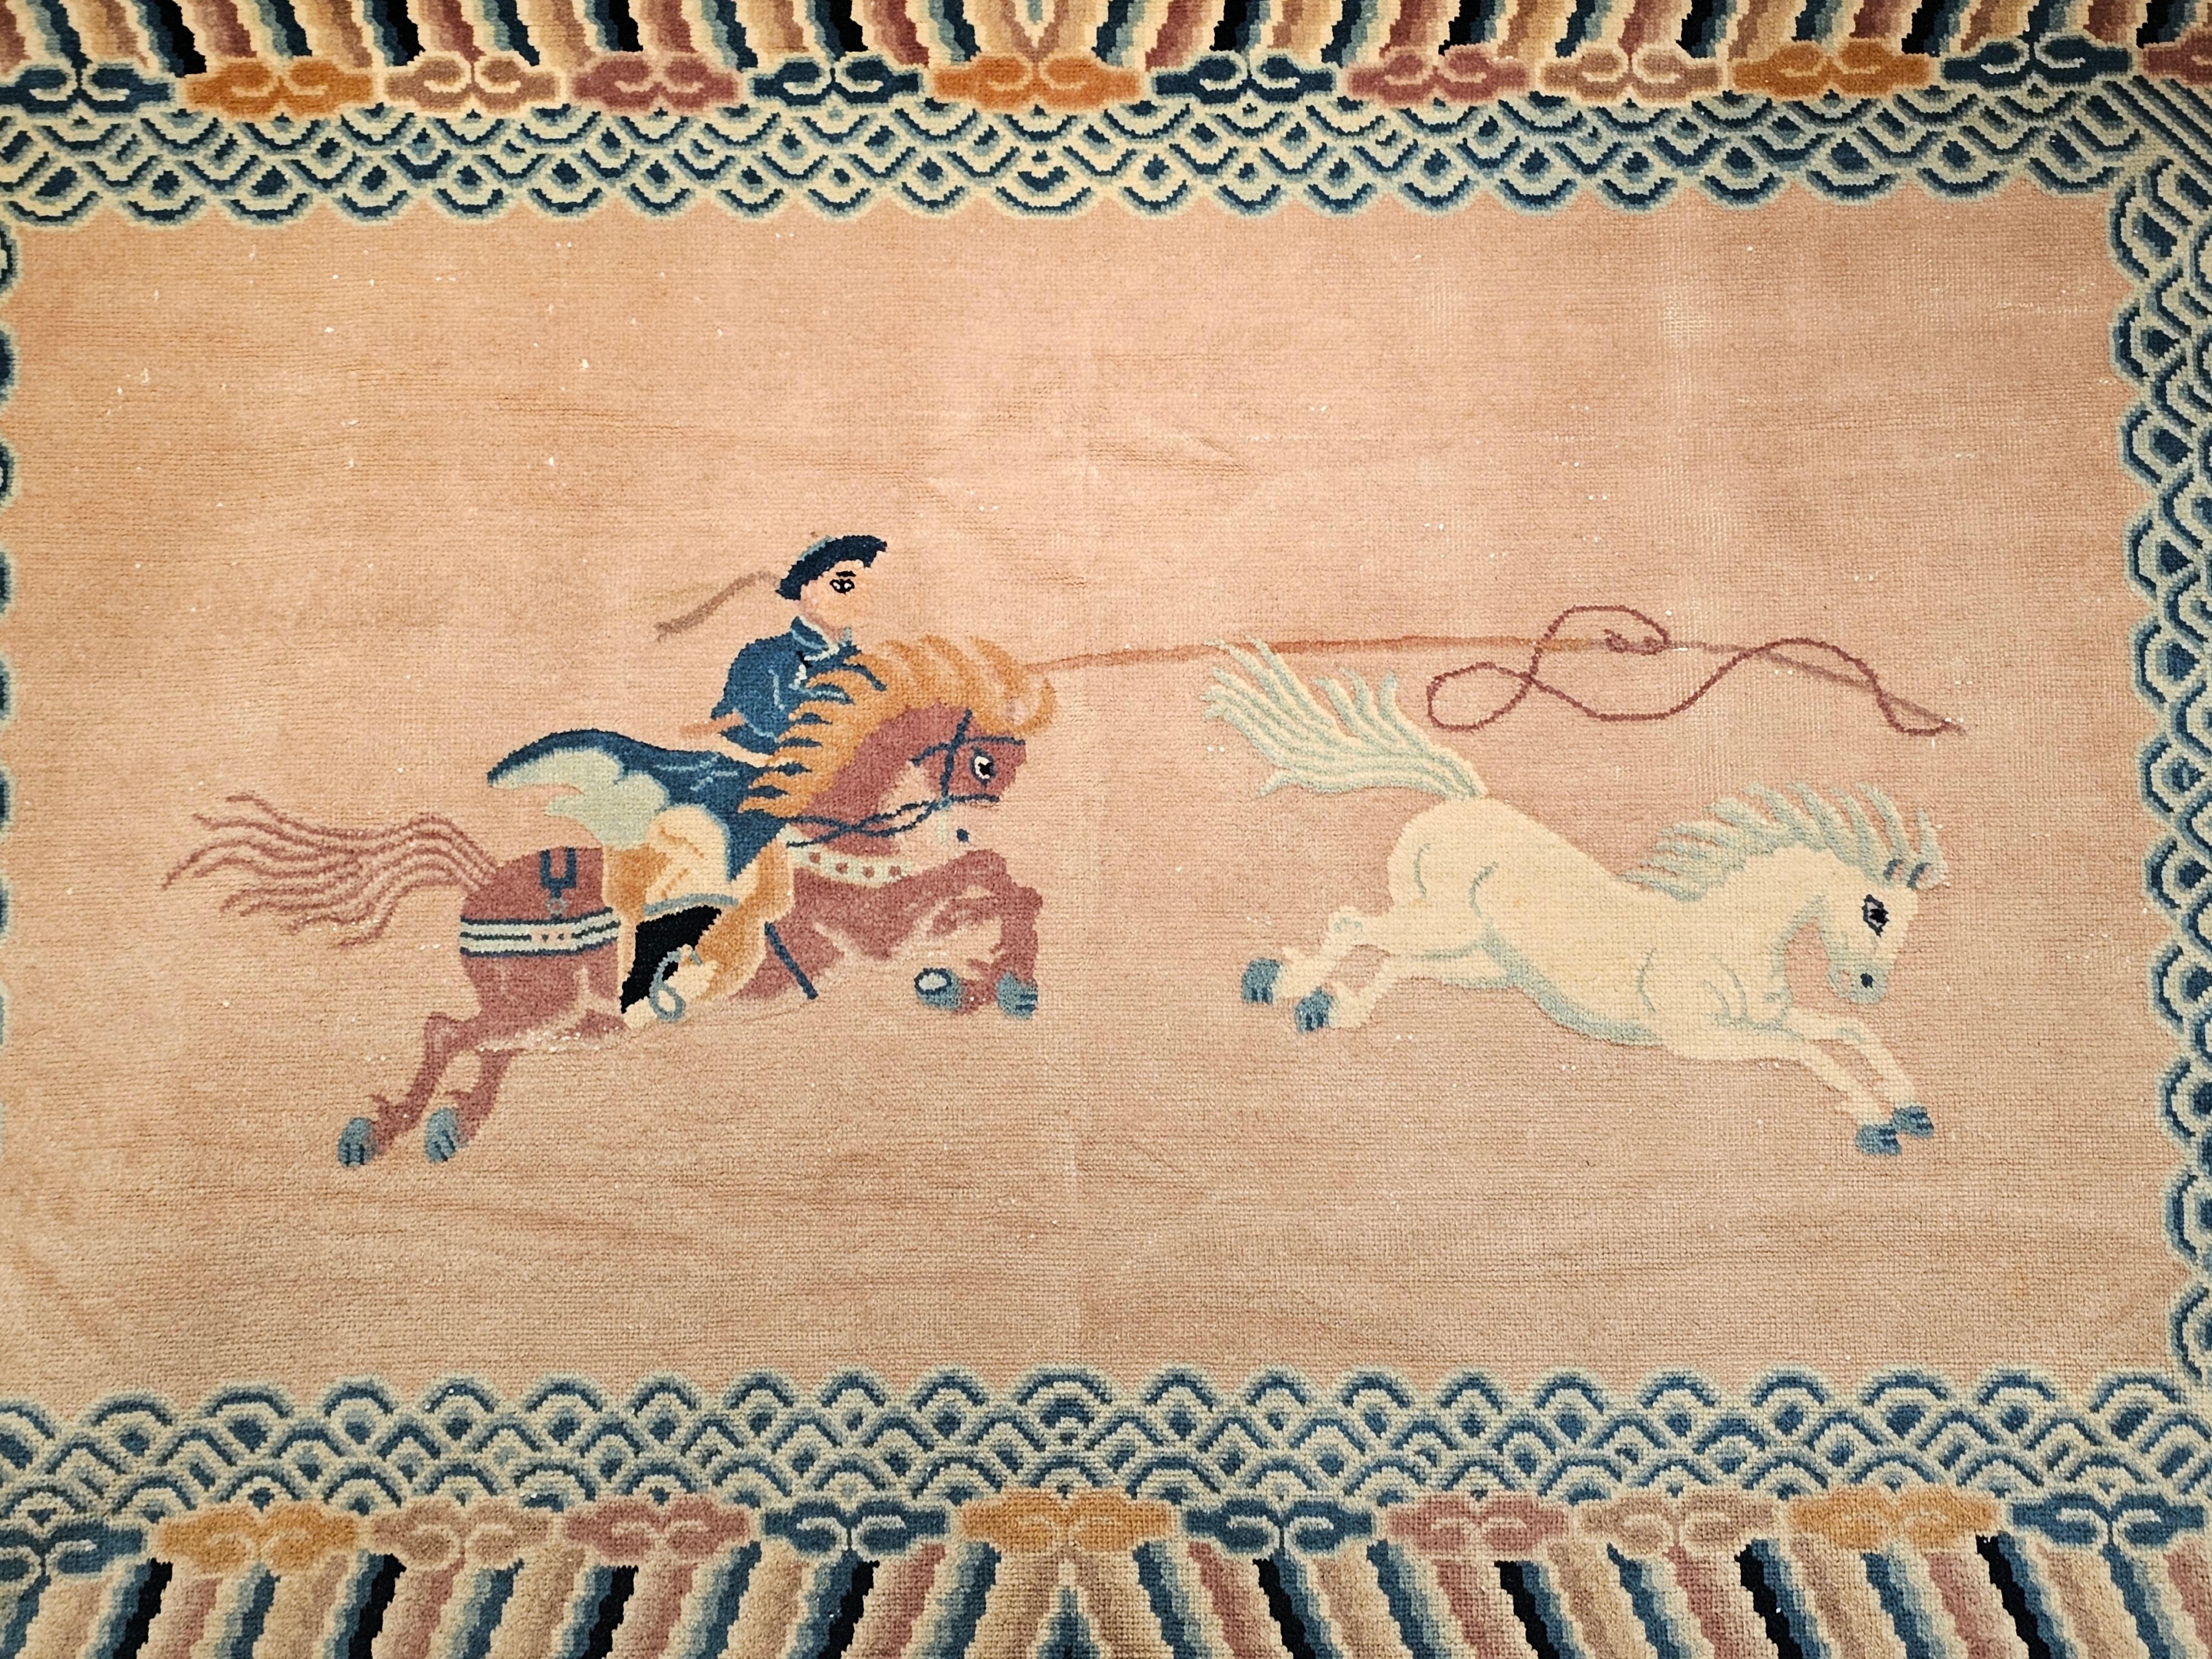 Vintage Chinese pictorial rug depicting a man on the back of the horse throwing a rope loop to capture a running wild horse.  The design is set on a pale pink background with multi-color border similar to the rugs from Khotan.   The rug has a wool